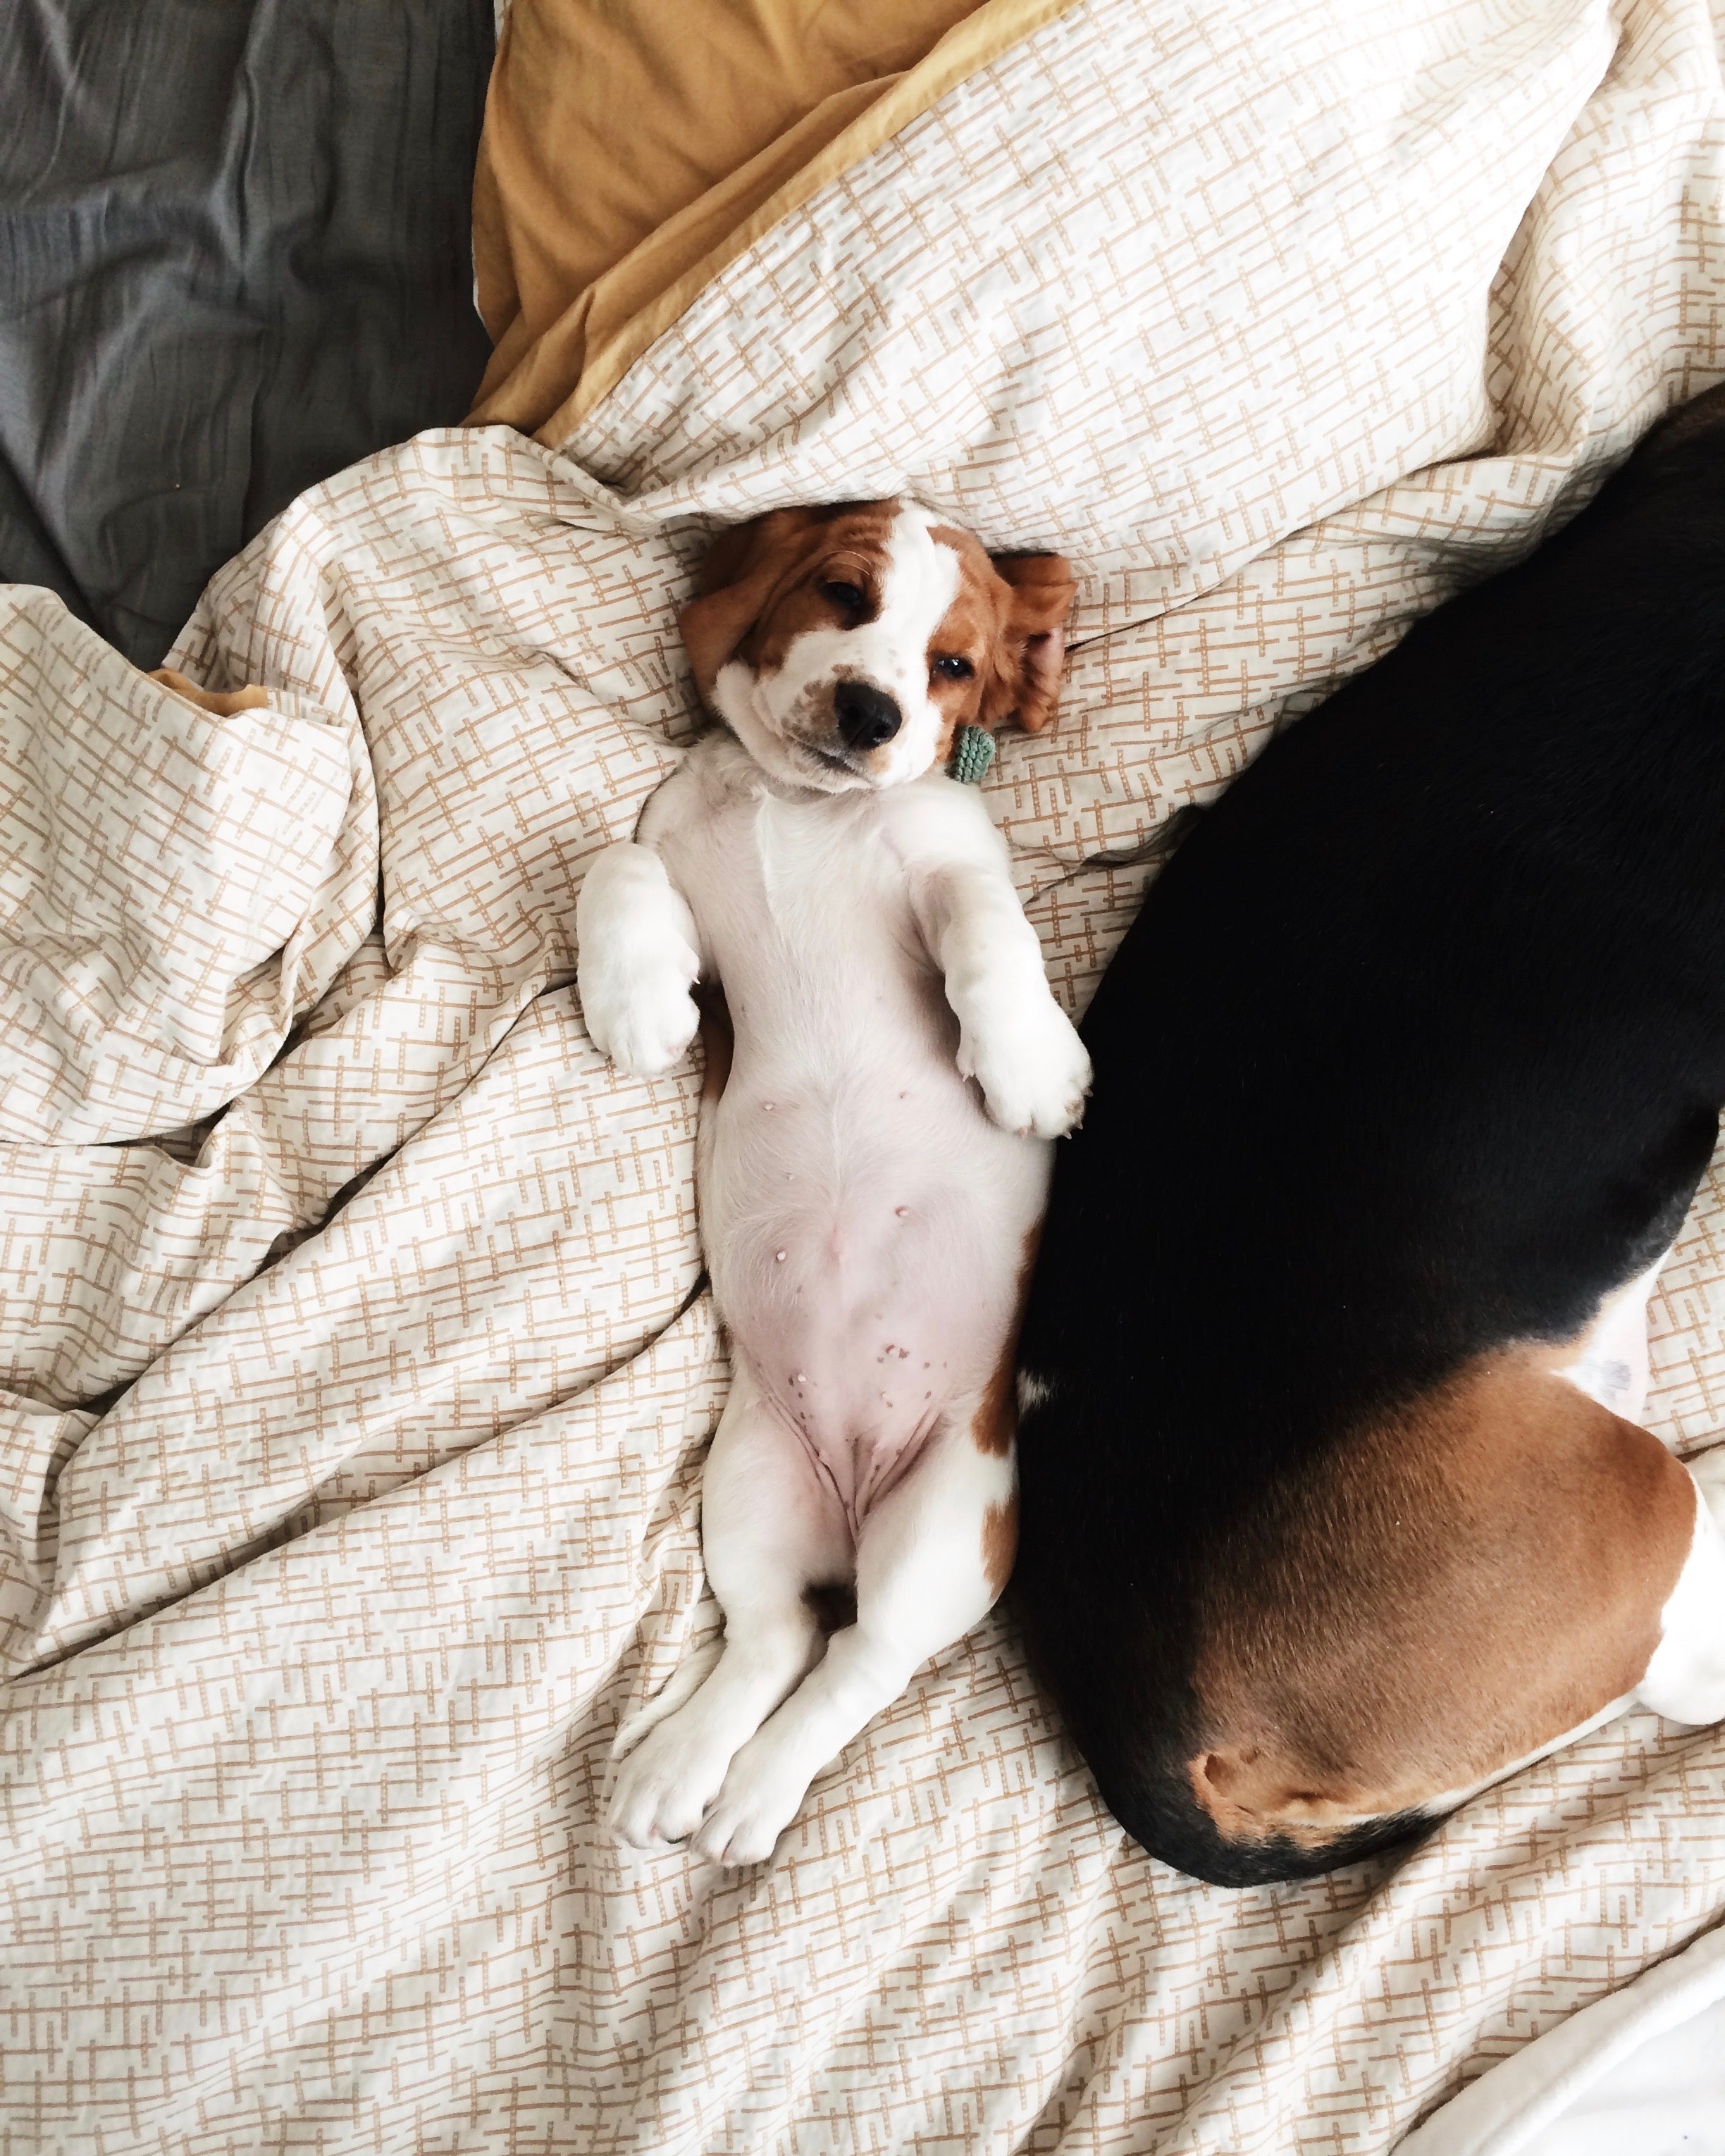 Cute puppy lying on its back next to larger dog